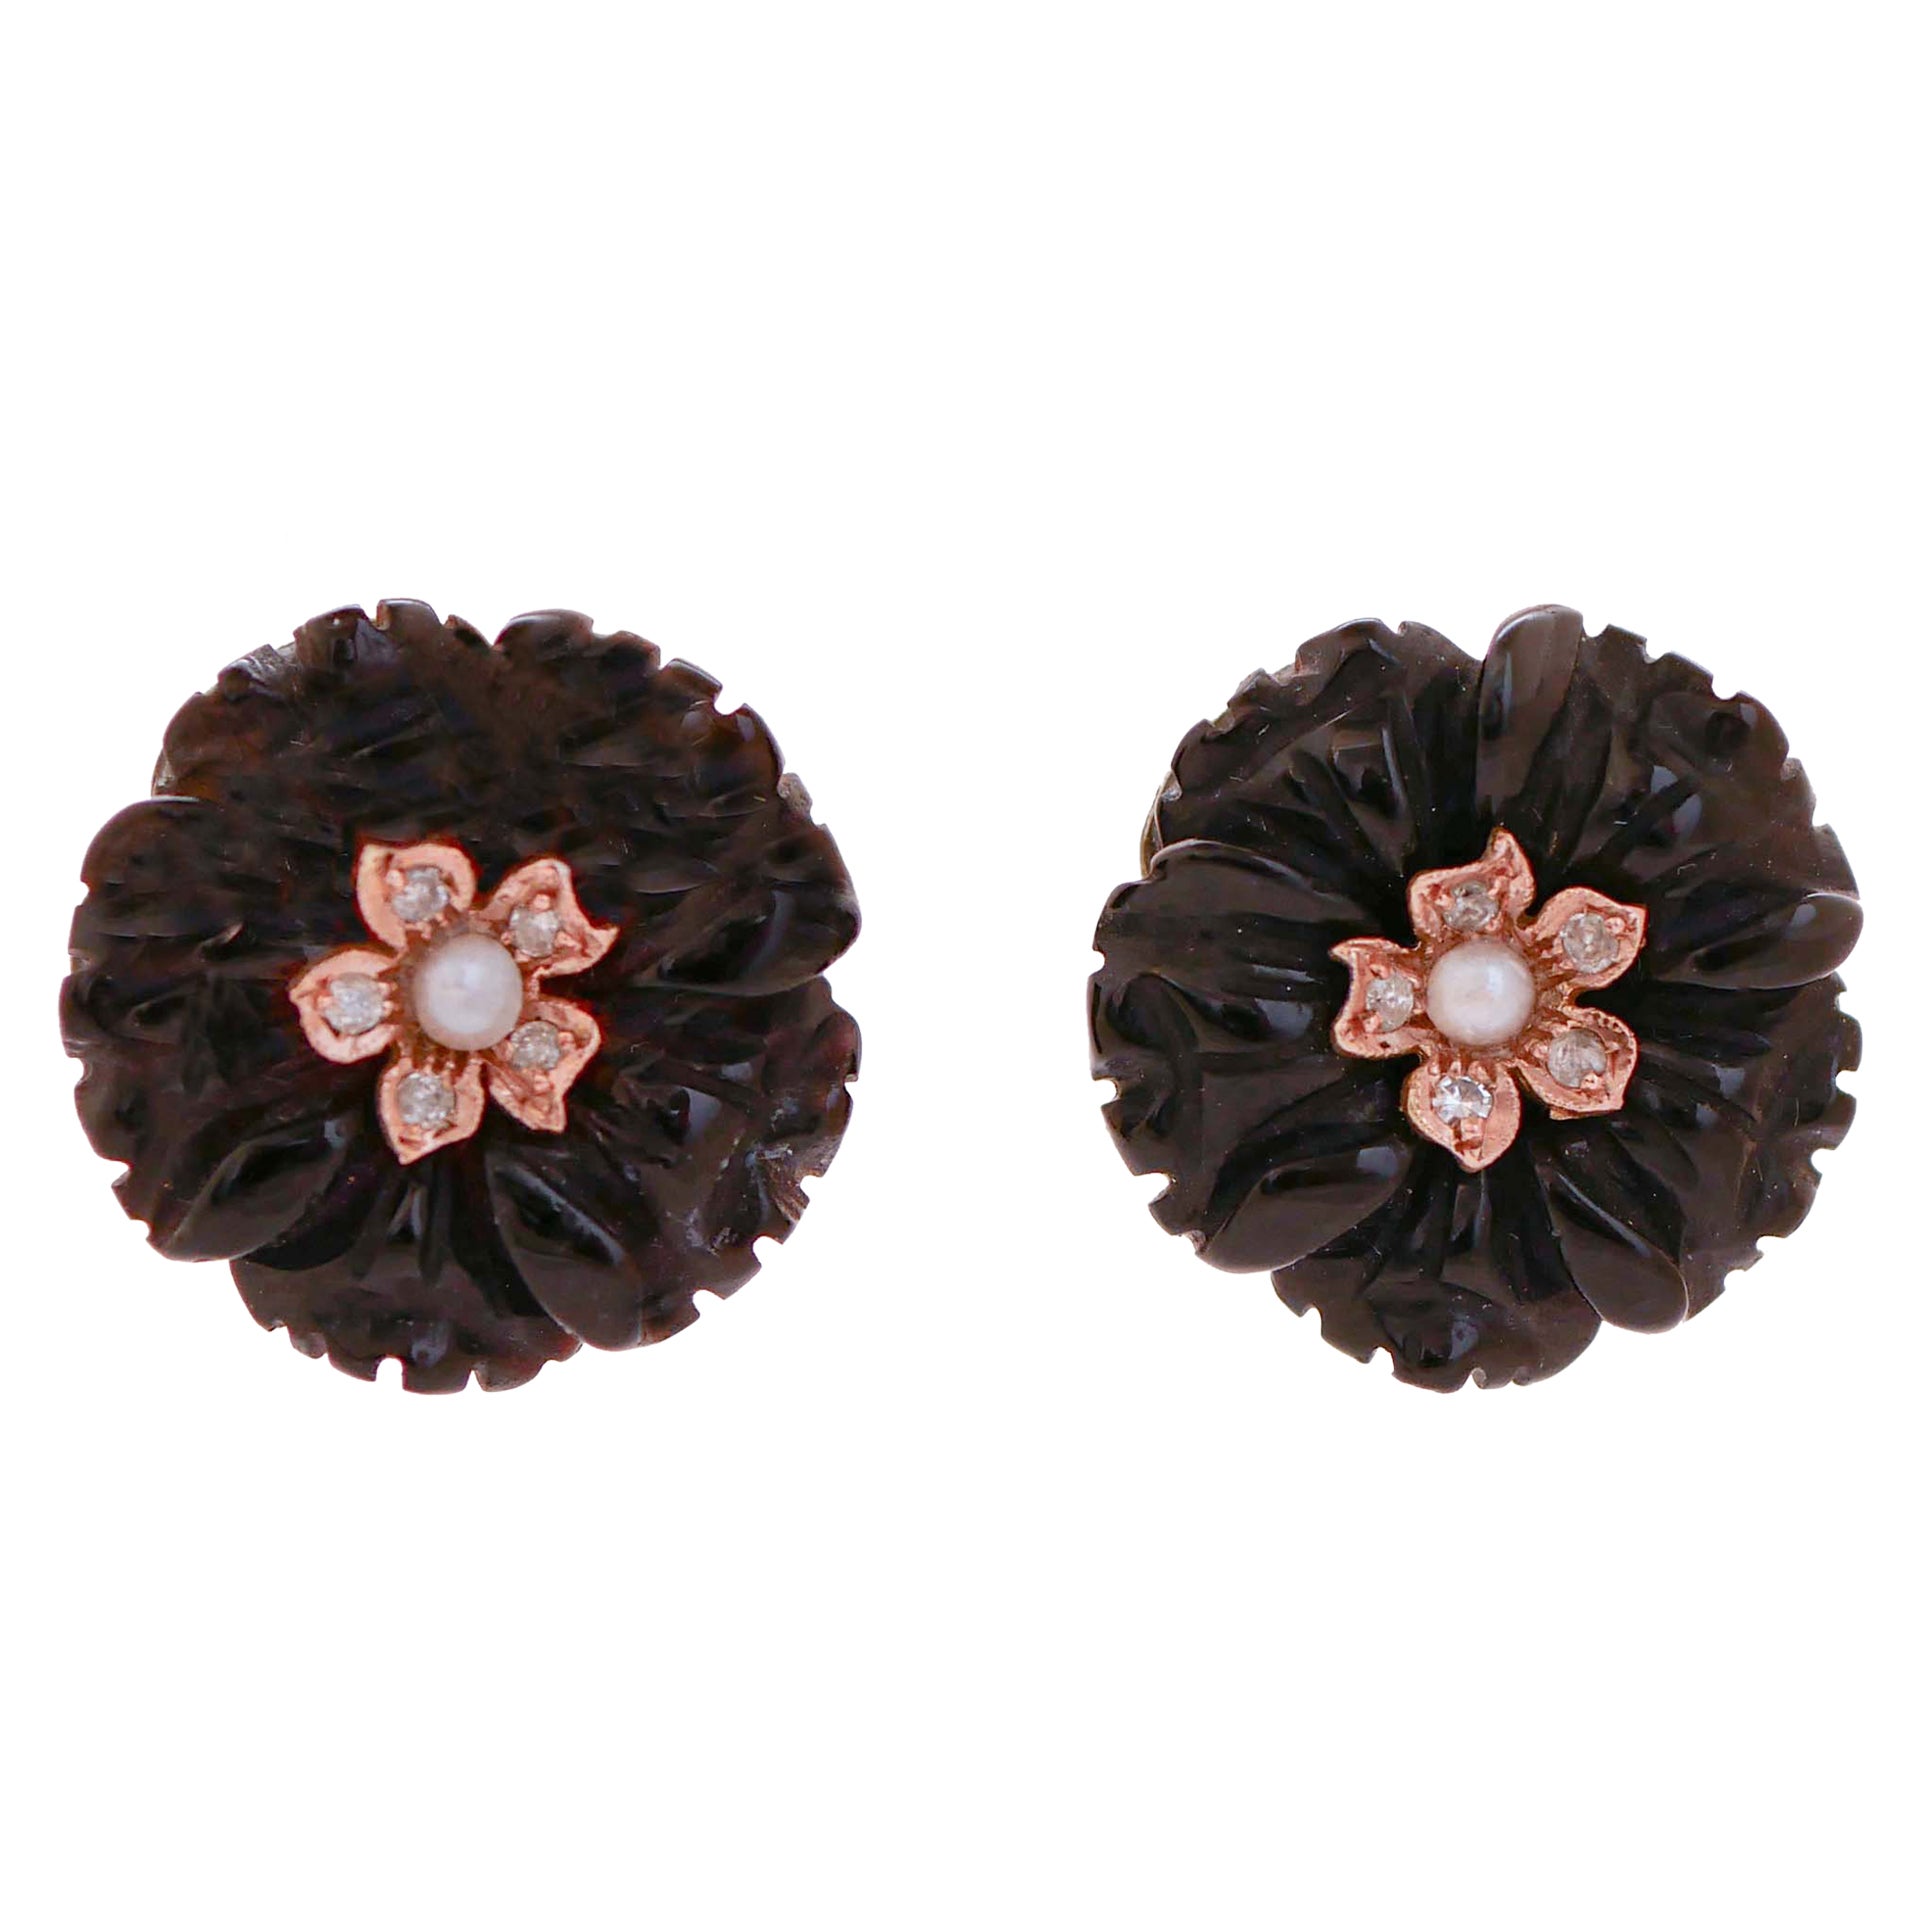 Onyx, Diamonds, Rose Gold and Silver Flower Earrings. For Sale